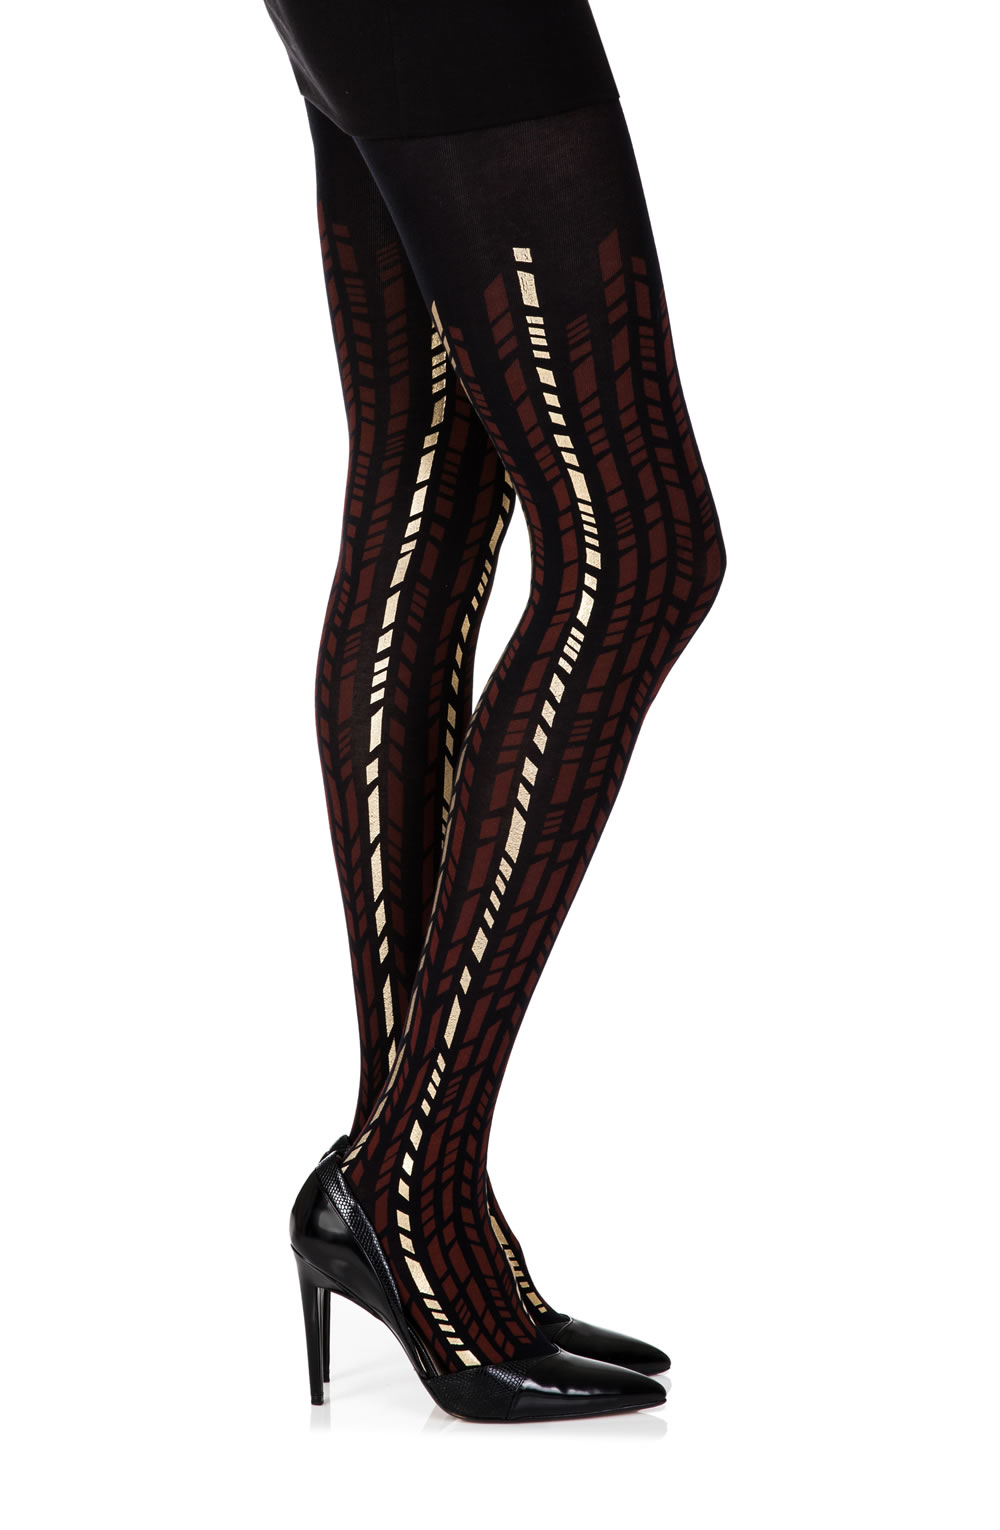 Picture of Zohara "Cross It" Burgundy/Gold Print Tights